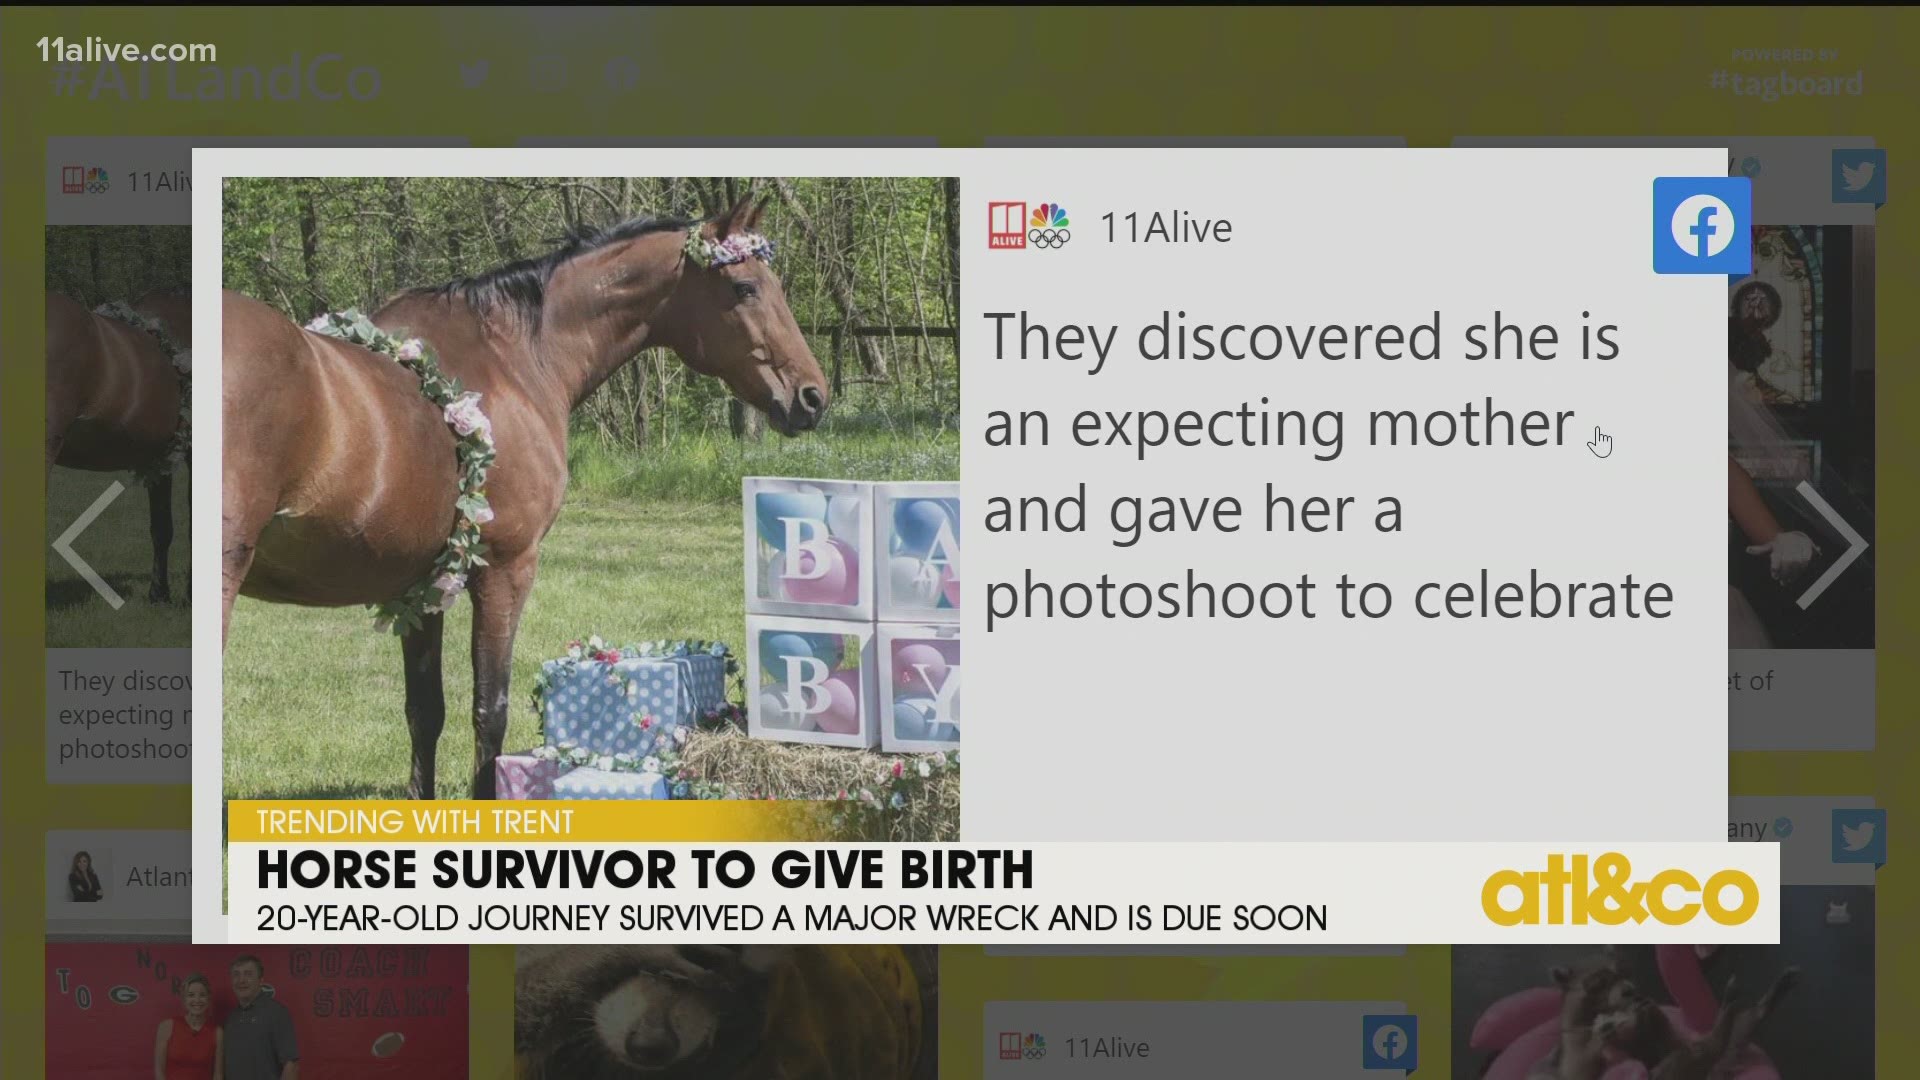 20-year-old horse Journey was saved from slaughter and now is expecting! See what's Trending with Trent on 'Atlanta & Company'